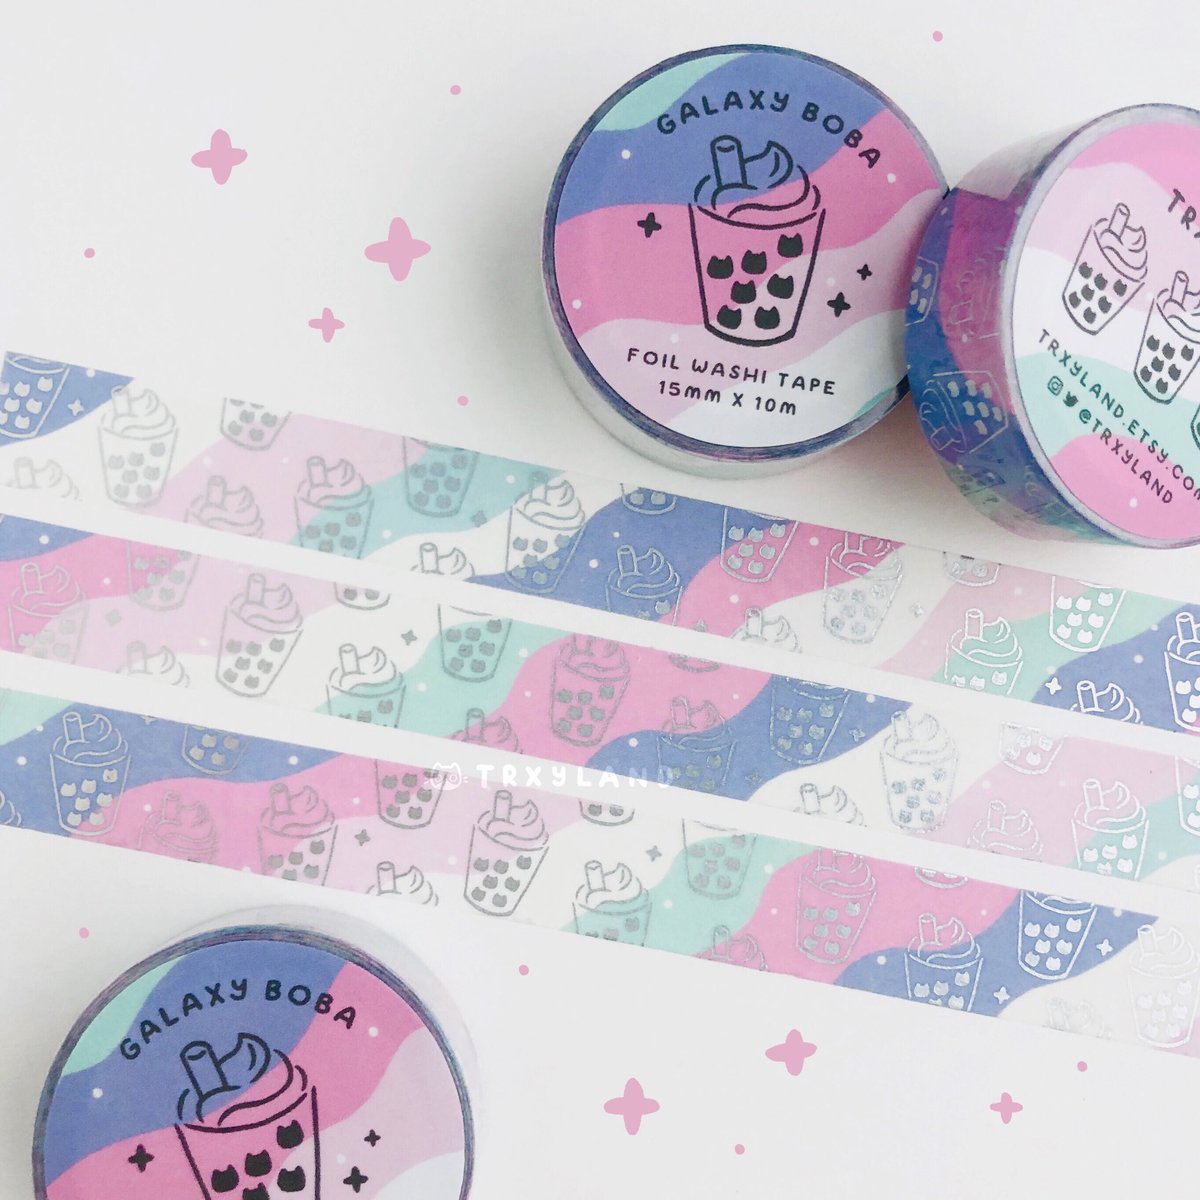 Galaxy Boba holo foil washi tape ✨ coming soon to my shop! https://t.co/H5lVzOEUkm 